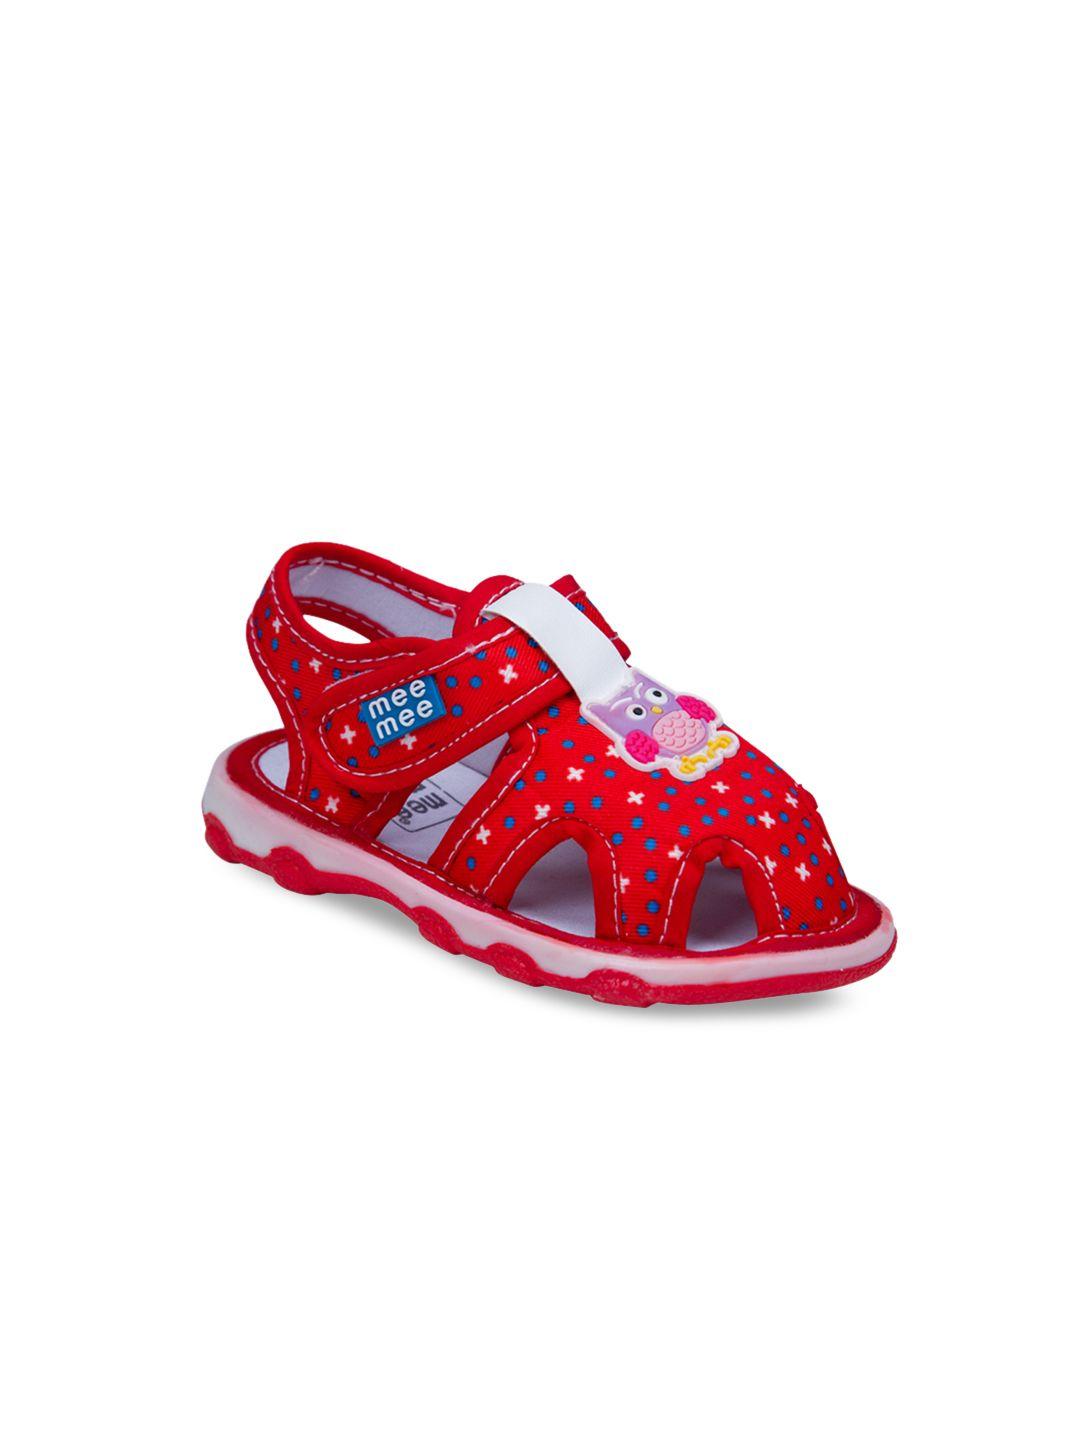 meemee girls red printed synthetic open toe flats